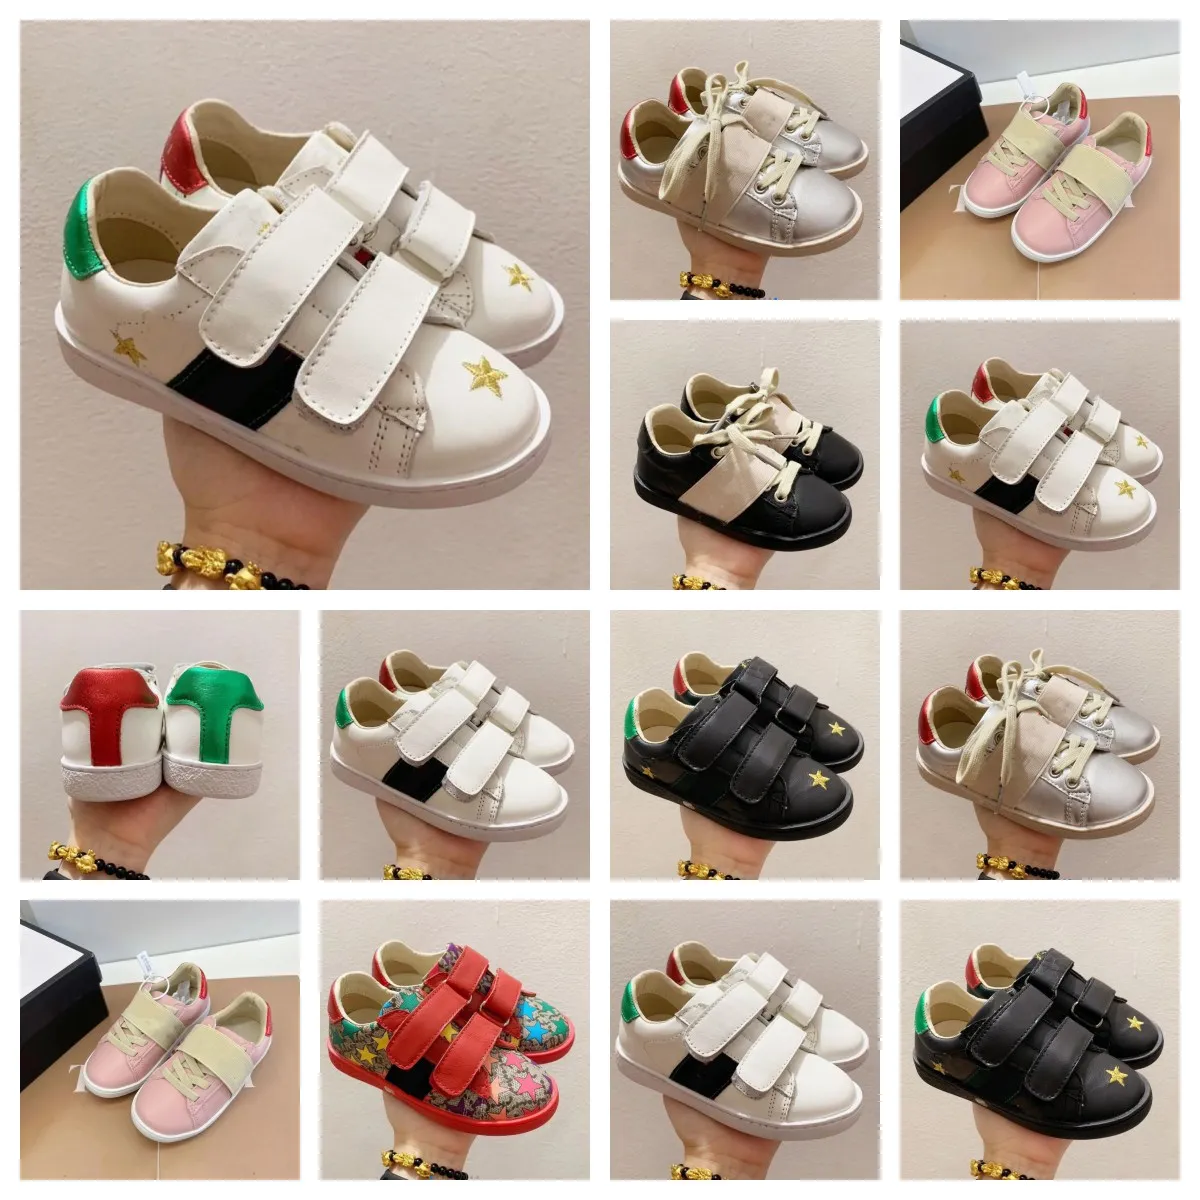 Newest Brand Designer shoes Sneakers Baby sneakers Newborn Boys Girls Heart Star First Walkers Crib Shoes Kids Lace Up breathable shoes Prewalker Sneakers size 24-35